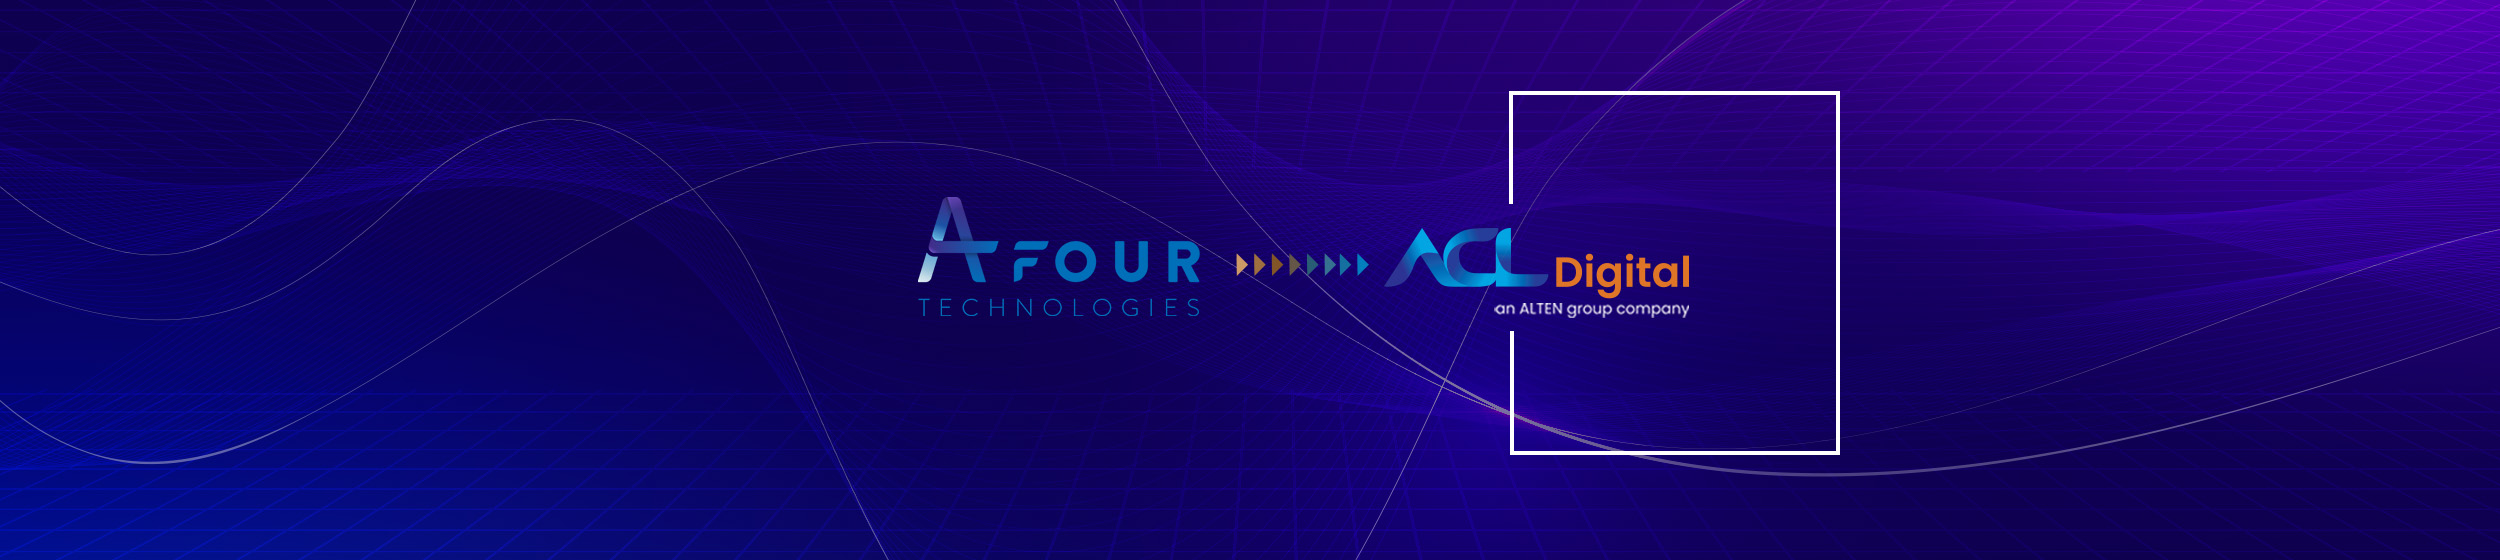 Banner-ACL Digital Acquires Afour Technologies